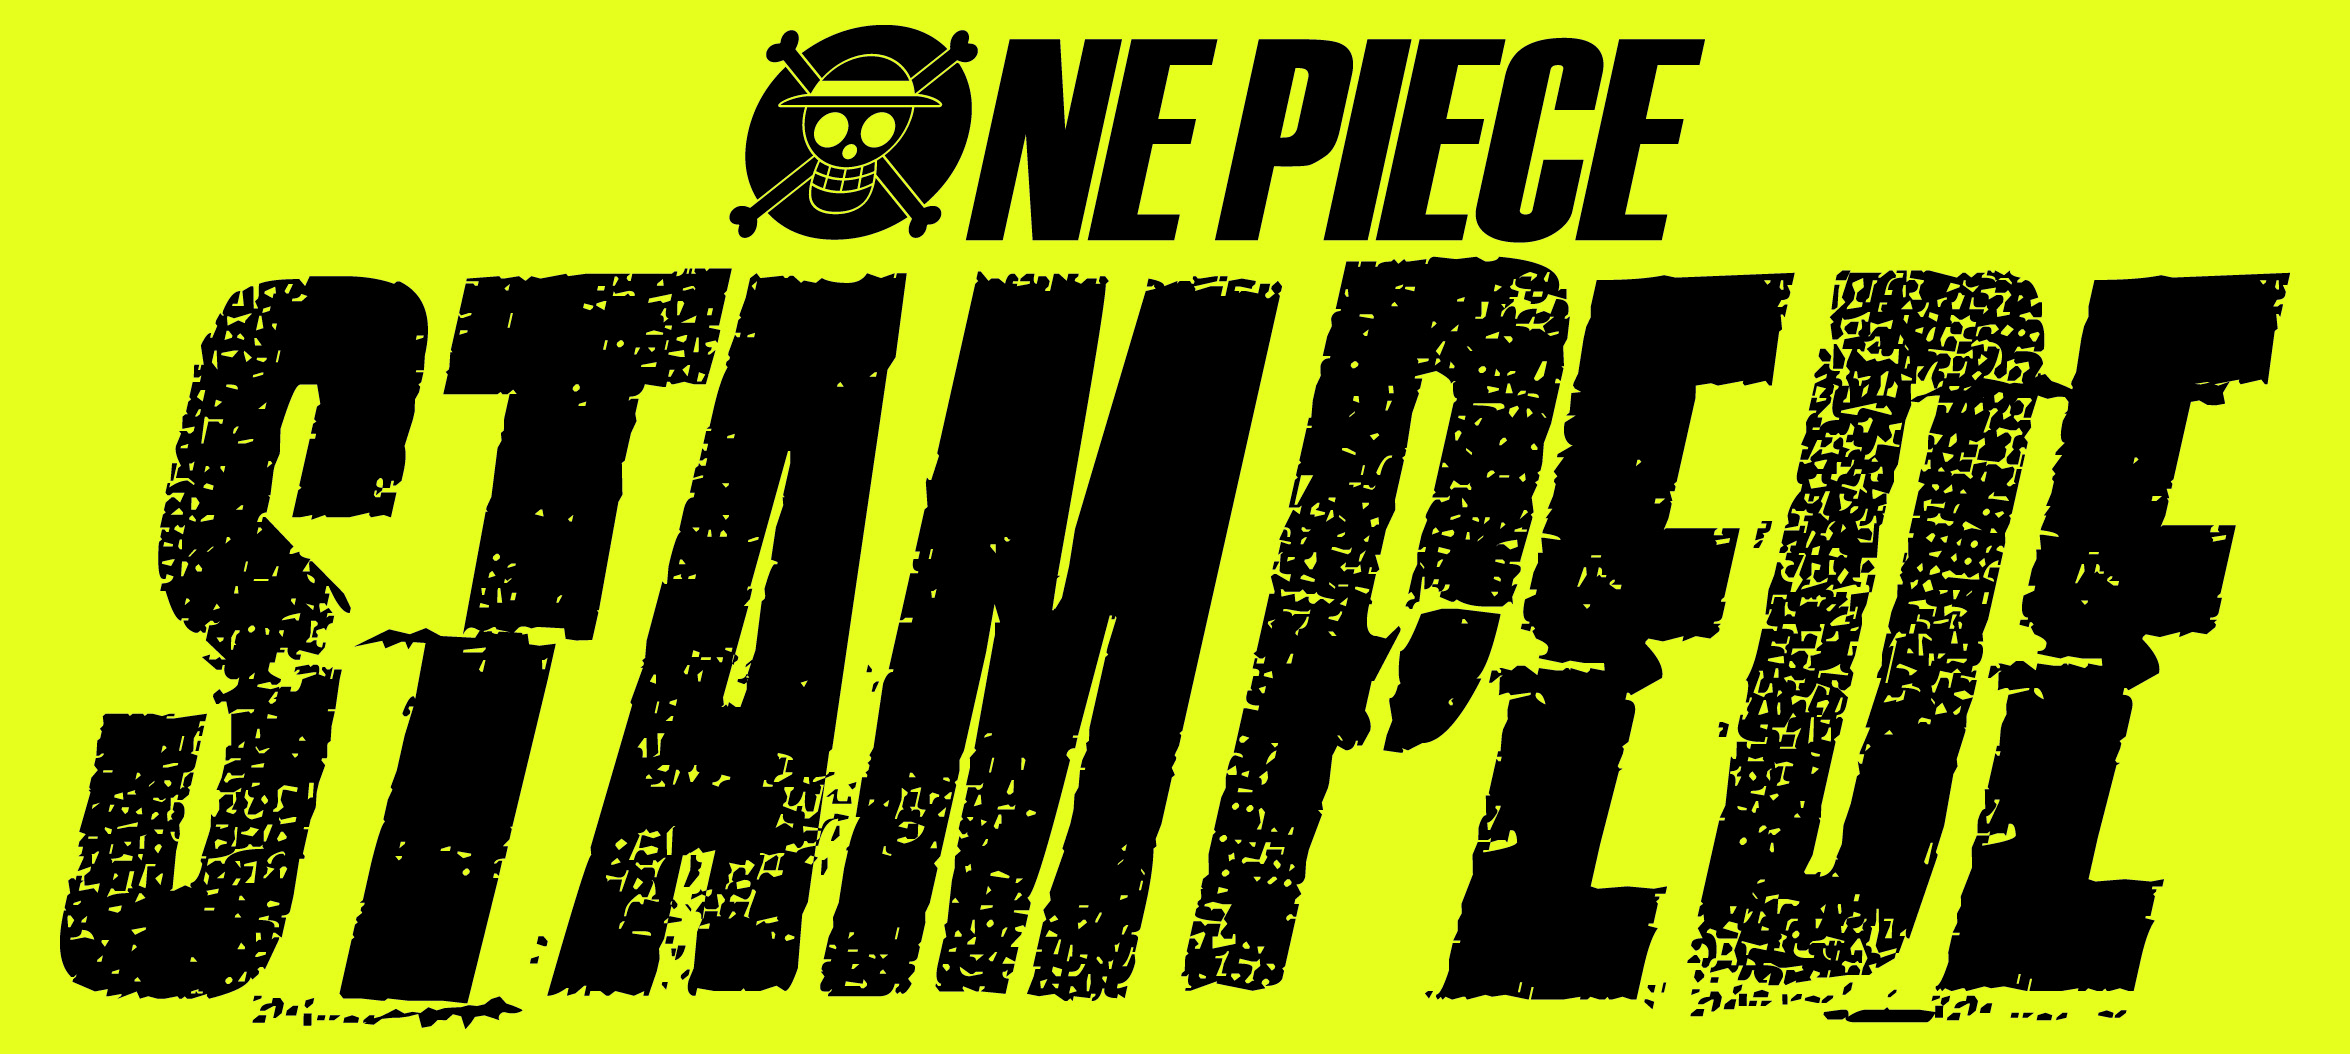 Funimation Announces North American Theatrical Release for One Piece:  Stampede